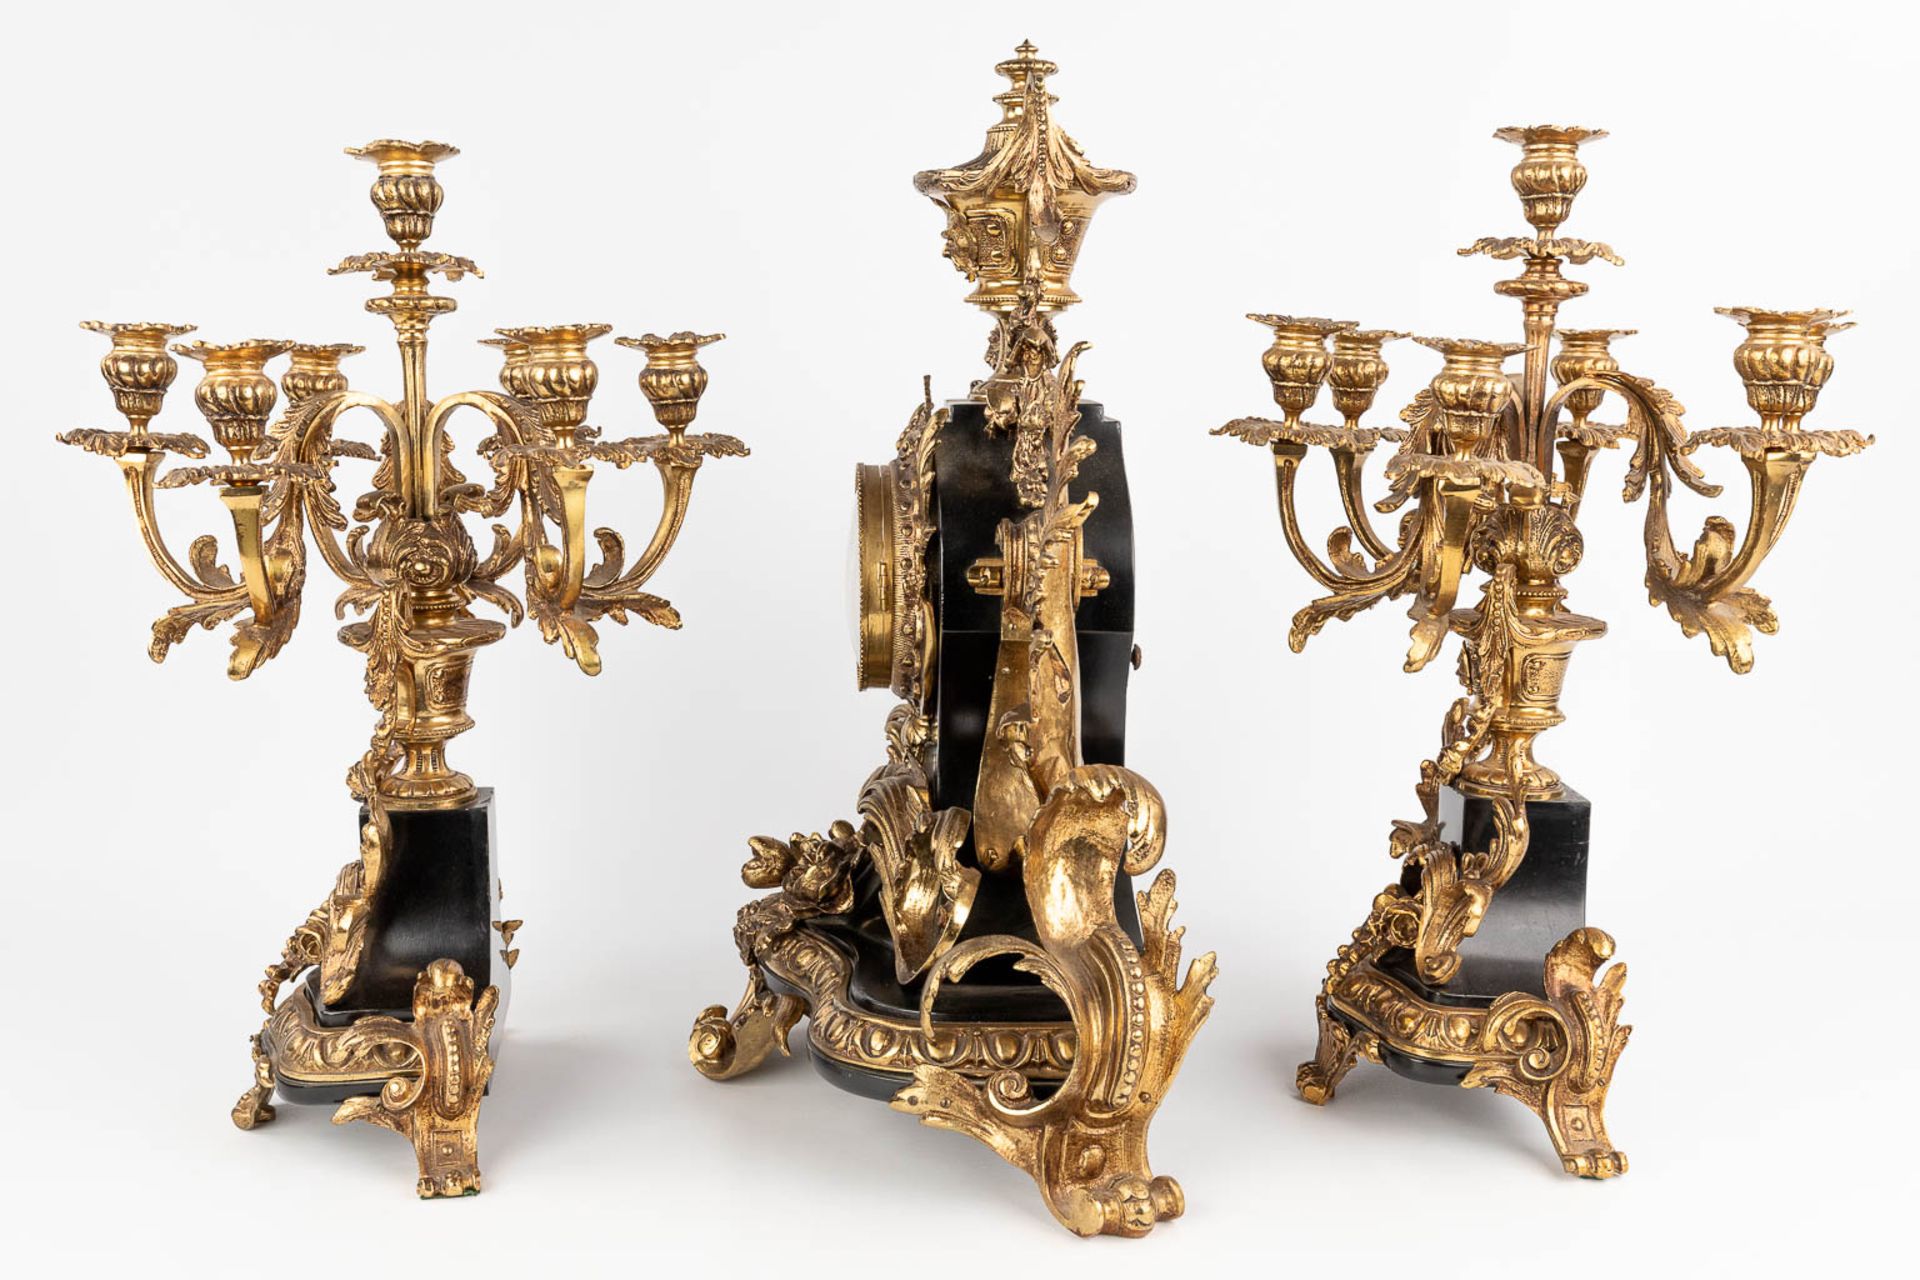 A three-piece mantle garniture clock and candelabra, Louis XV style. Circa 1970. (D:25 x W:51 x H:55 - Image 6 of 14